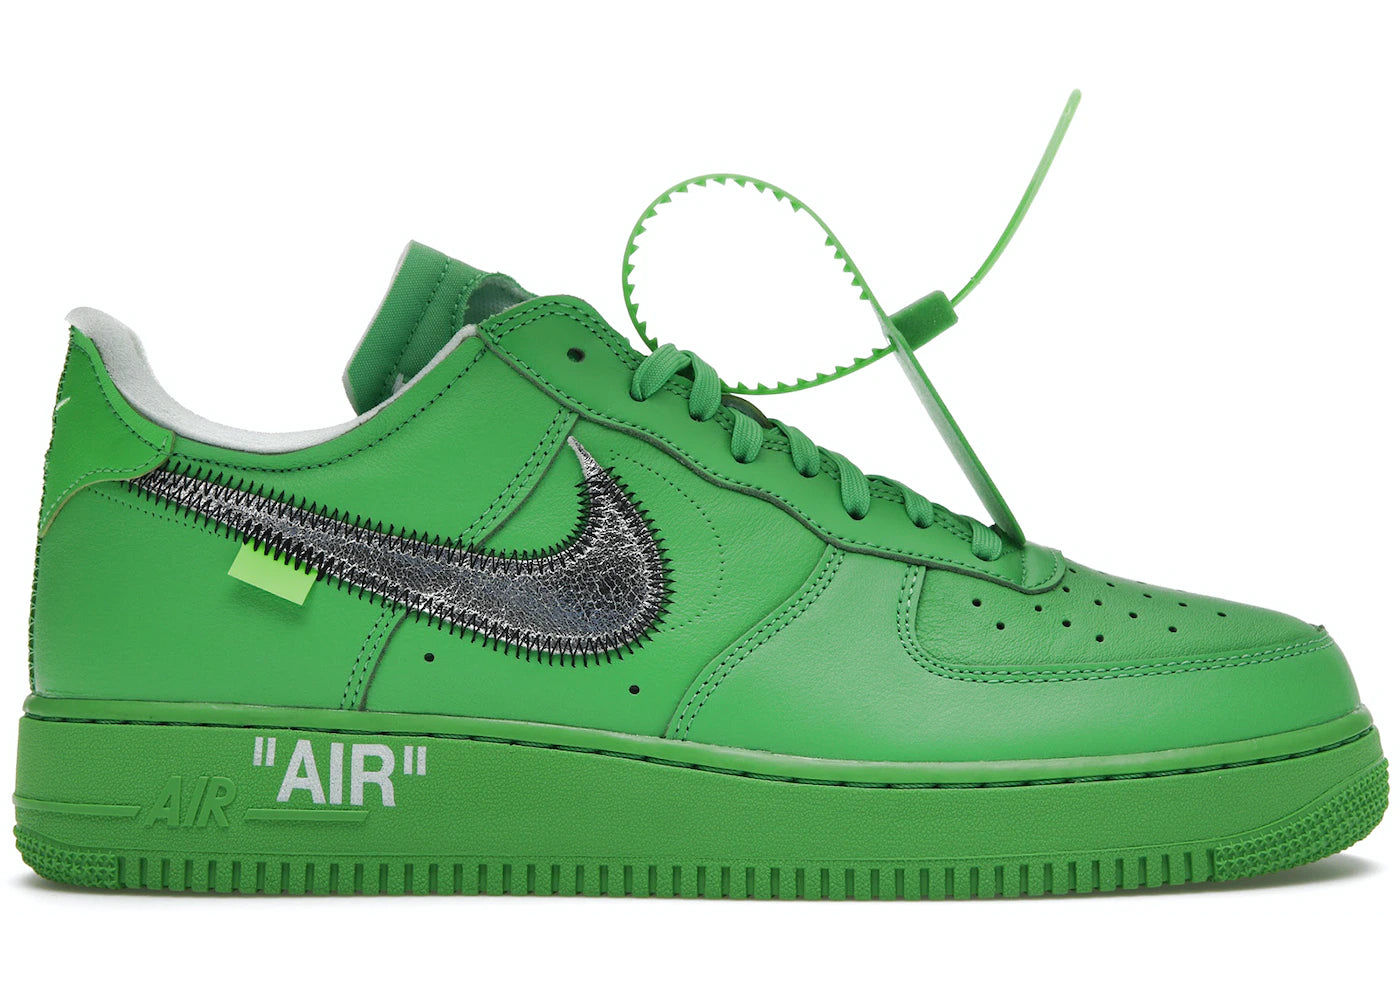 Nike x Off White Air Force 1 Low Brooklyn 8.5 / New (Replacement Box)